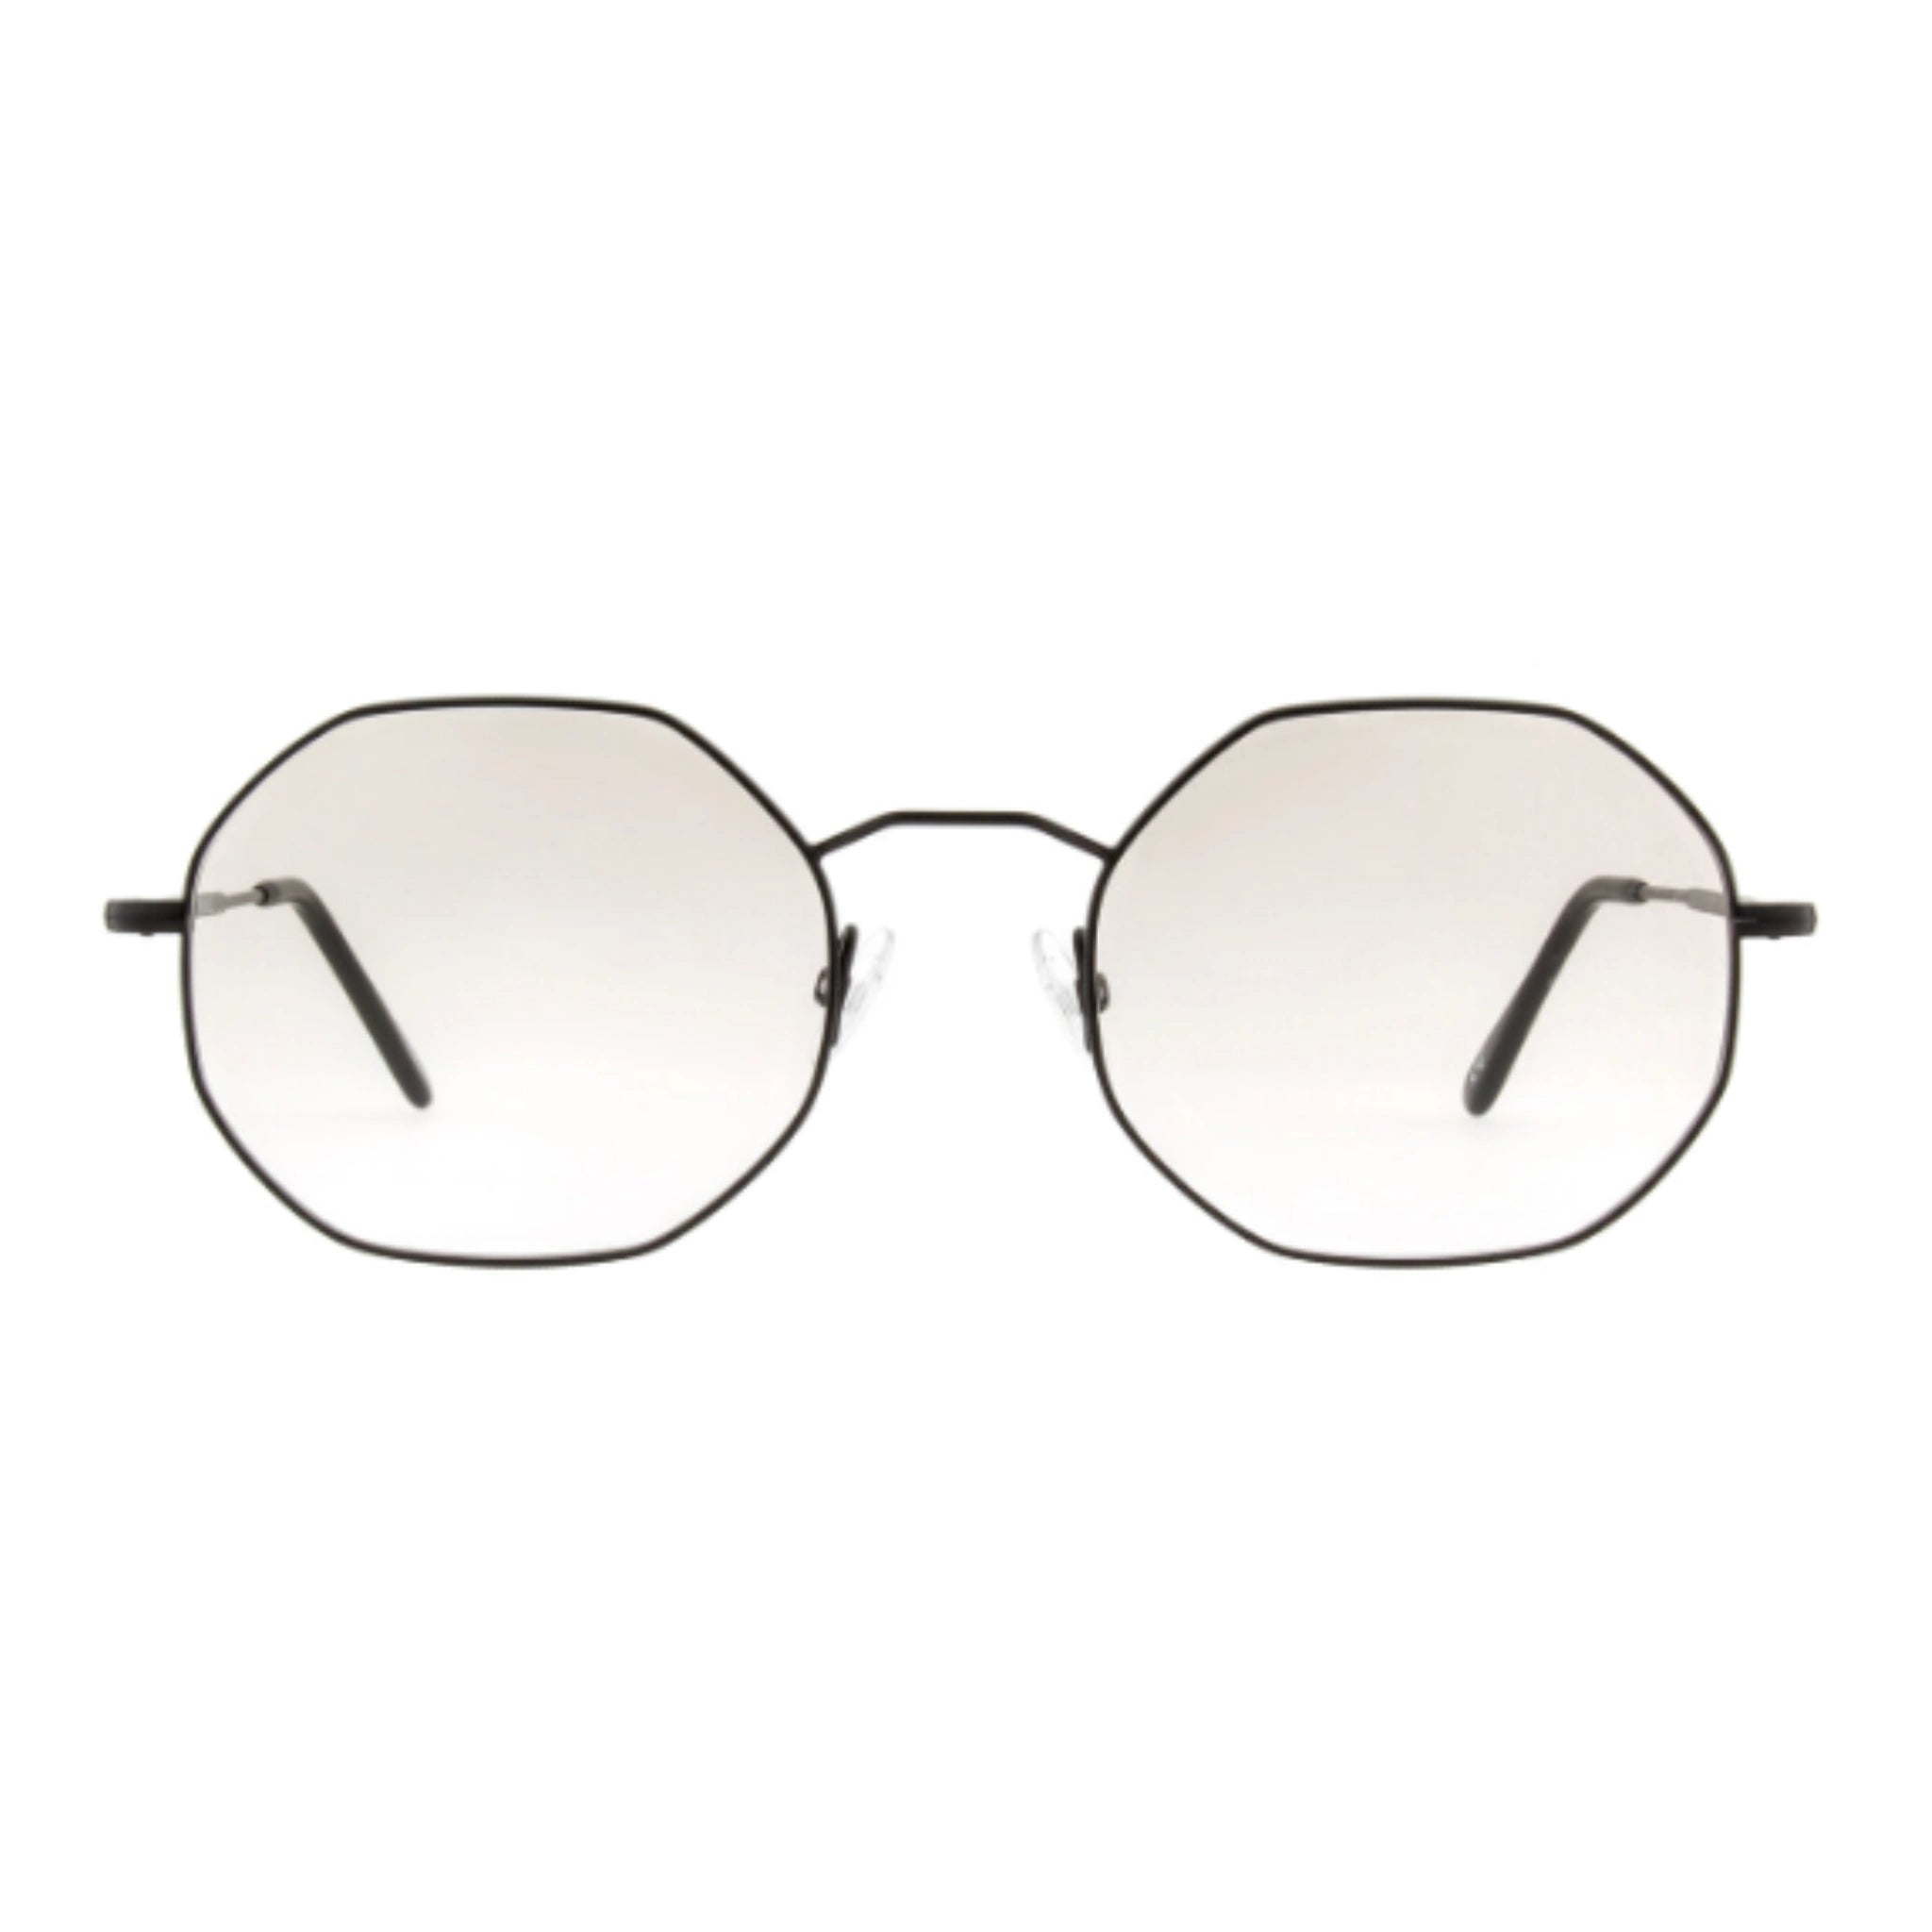 Andy Wolf luxury prescription eyeglasses online at The Optical Co